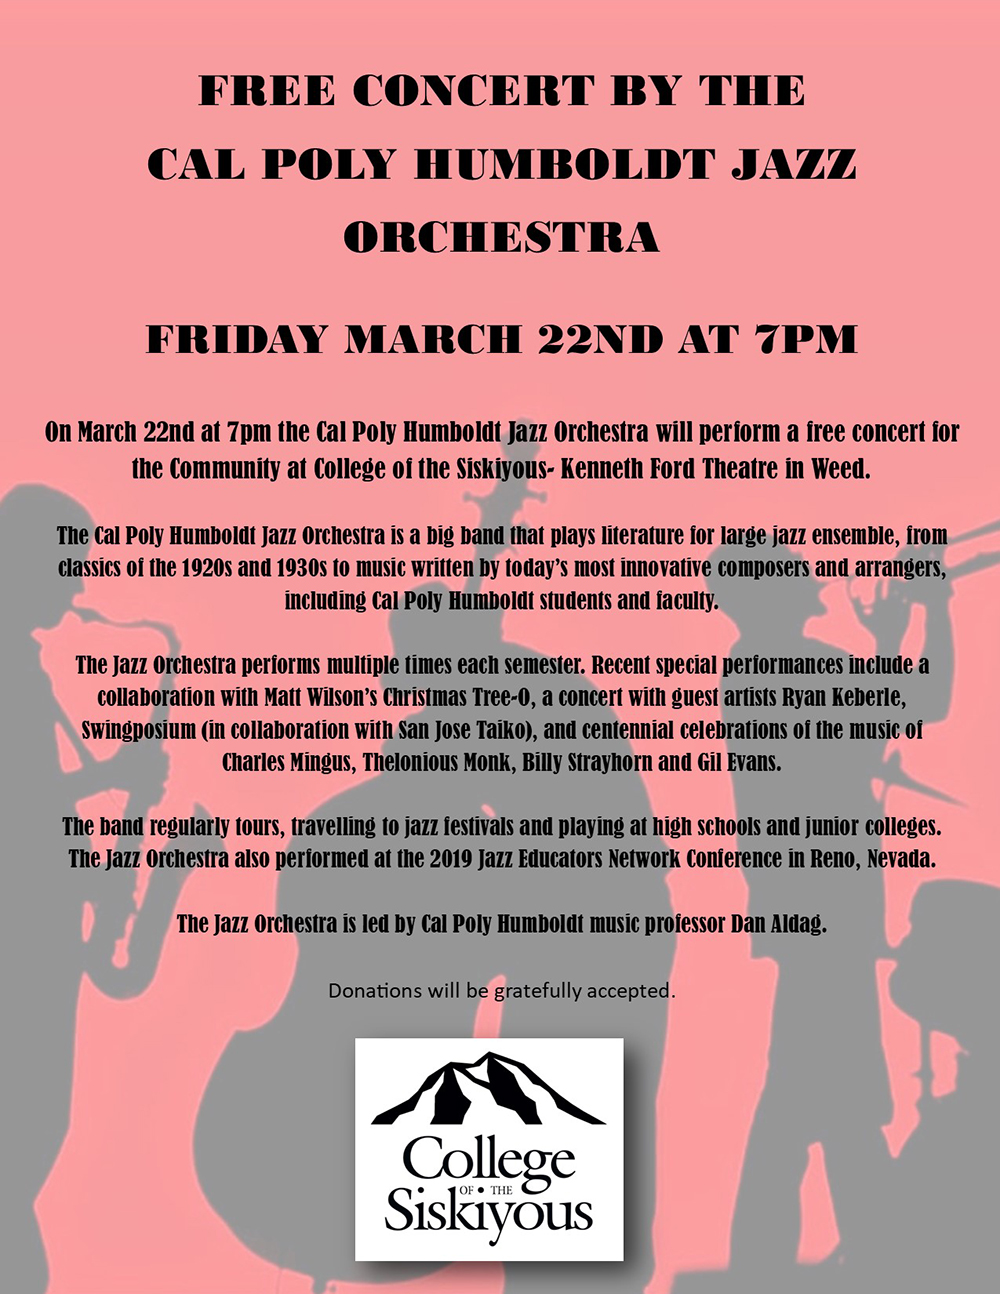 Free Concert by the Cal Poly Humboldt Jazz Orchestra. Friday, March 22, 7:00 pm. Donations gratefully accepted.